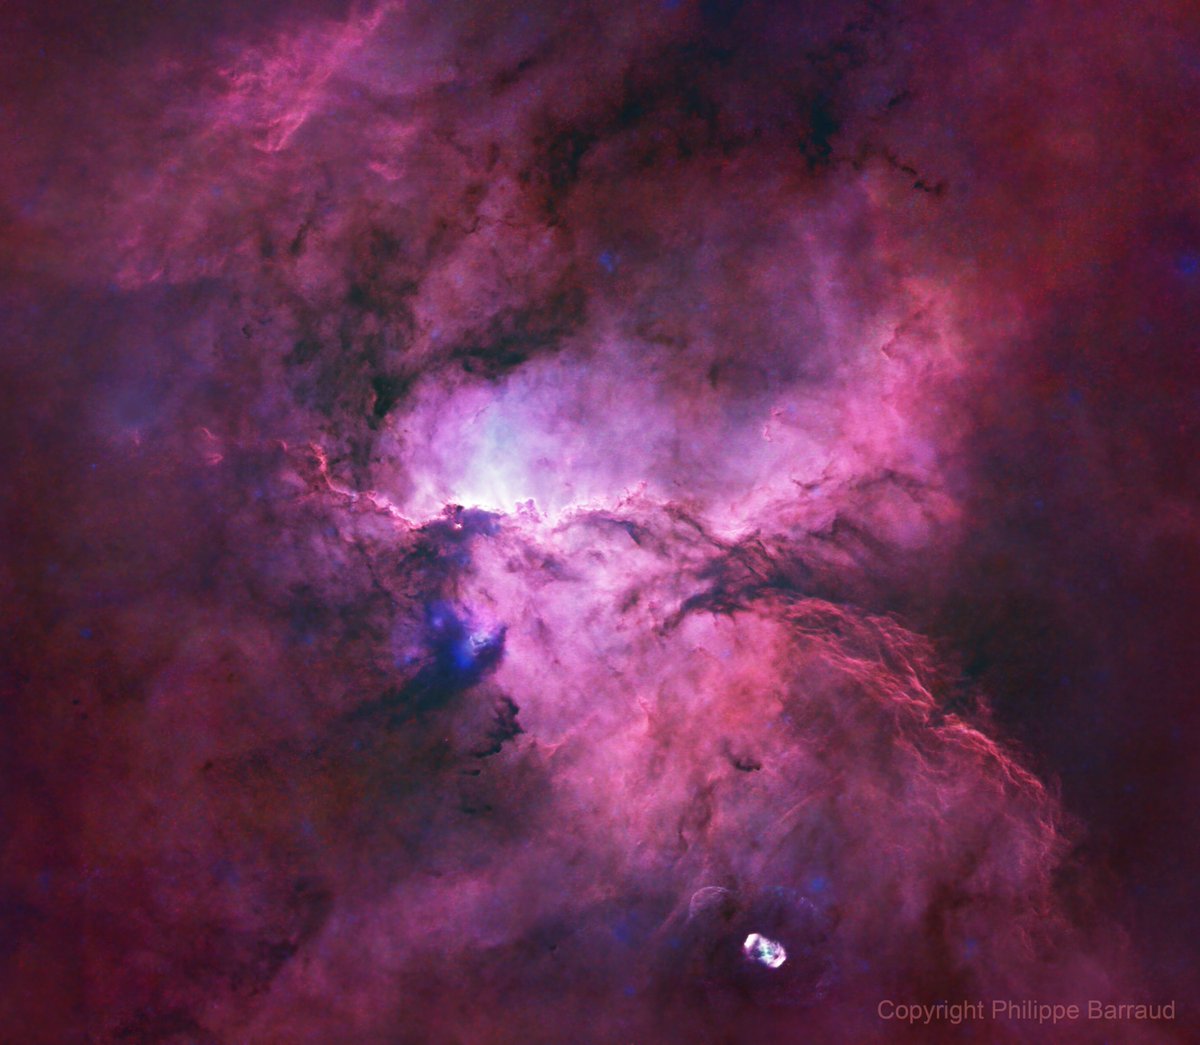 Image of NGC 6188, shared on AstroBin by Philippe Barraud, who used data from AstroBin sponsor @SkygemsNetwork (a way to control top-notch observatories around the world straight from your browser). More: astrobin.info/skygems Image: astrobin.com/wjzw1w Thanks! S.